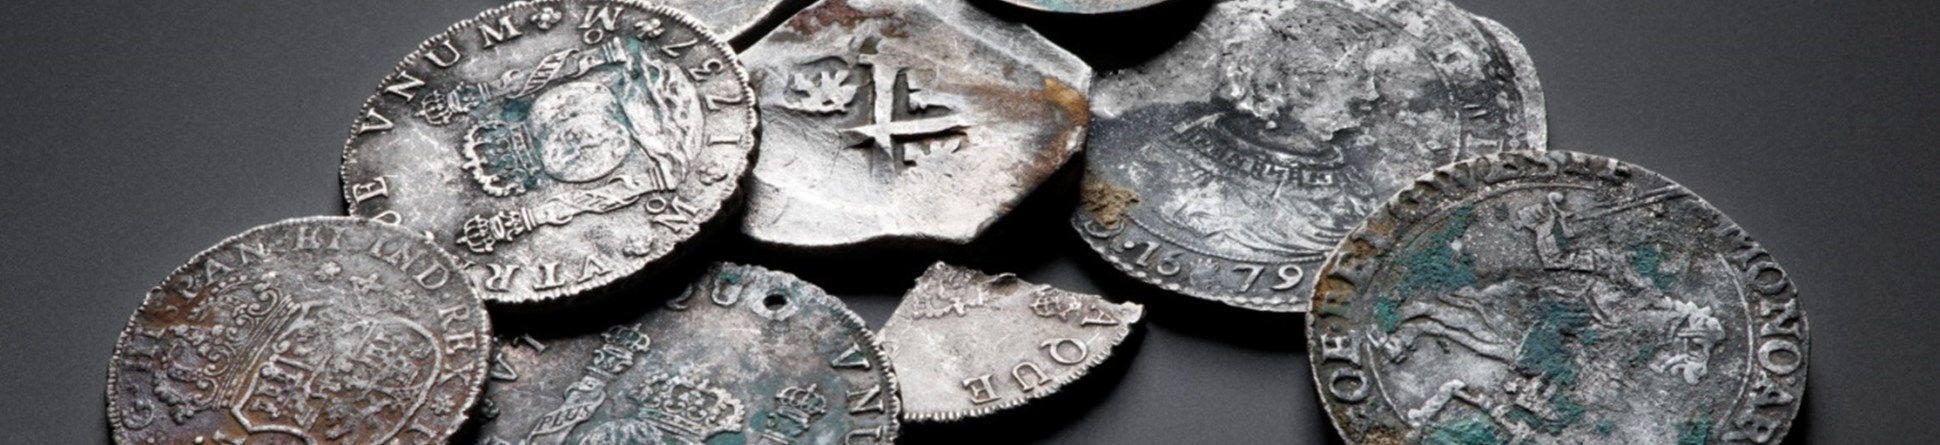 A selection of silver coins, including some snipped fragments.